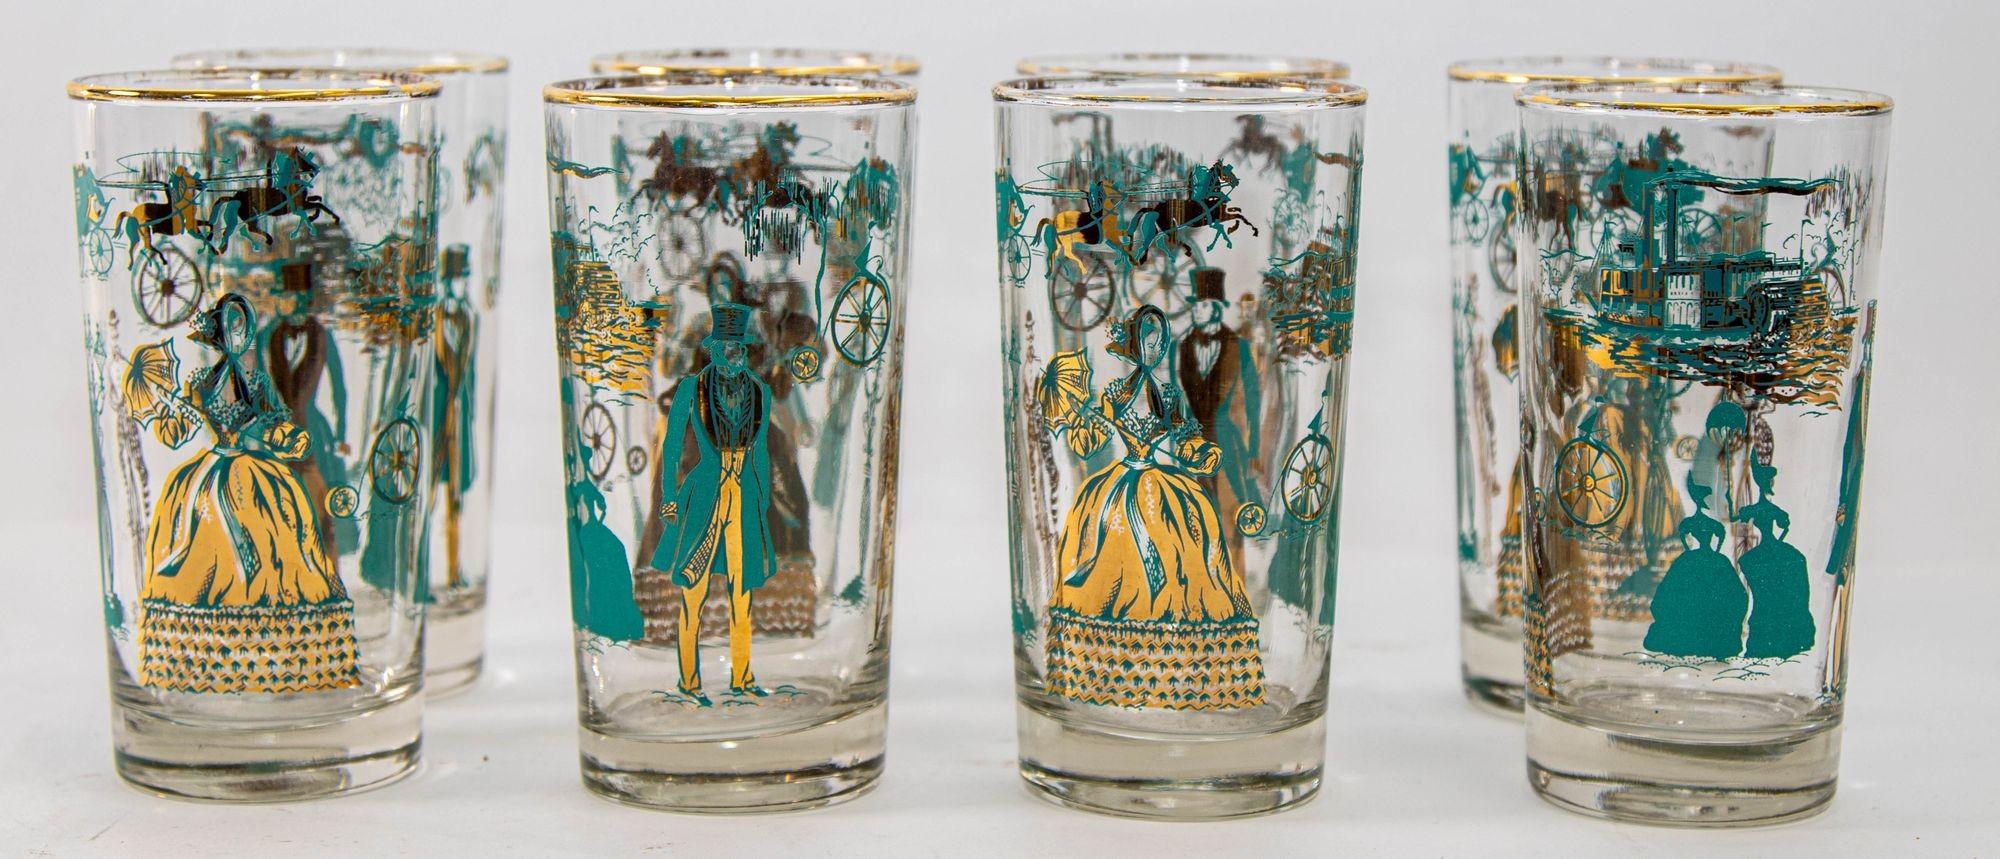 Vintage Turquoise and Gold Highball Barware Glasses Set of 8, circa 1960 7